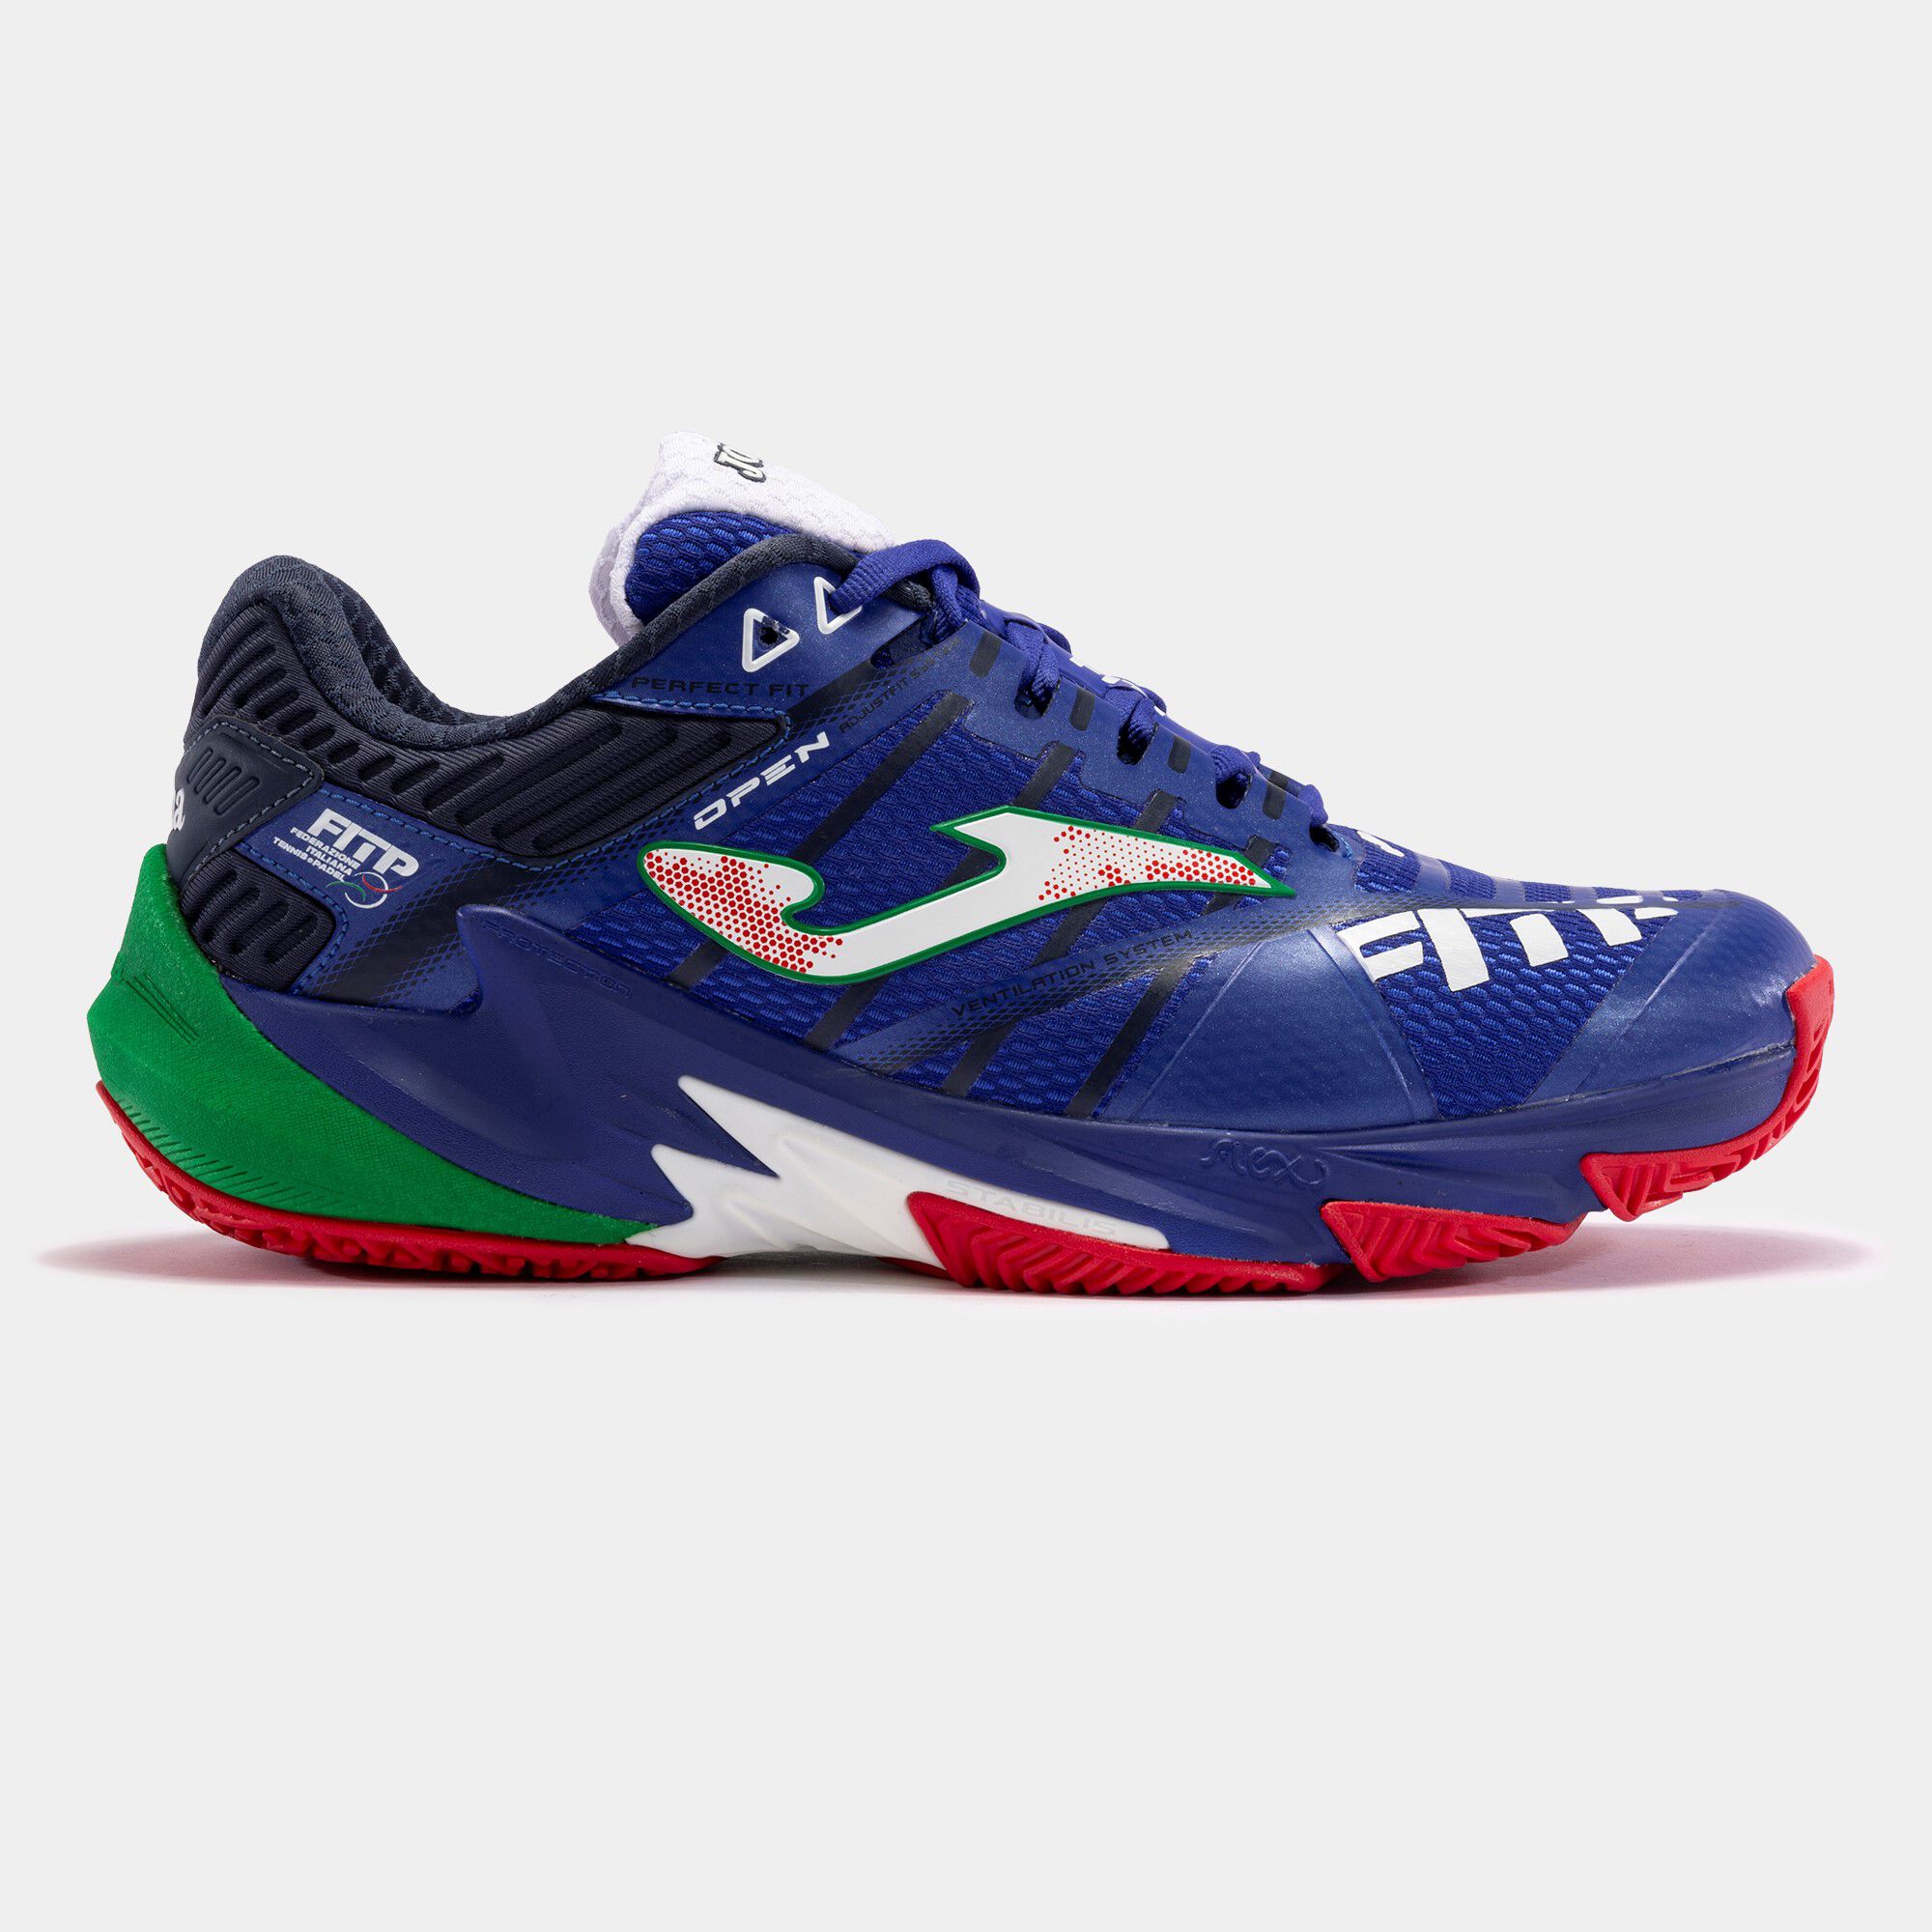 Shoes Open 24 Italian Tennis And Padel Federation unisex royal blue